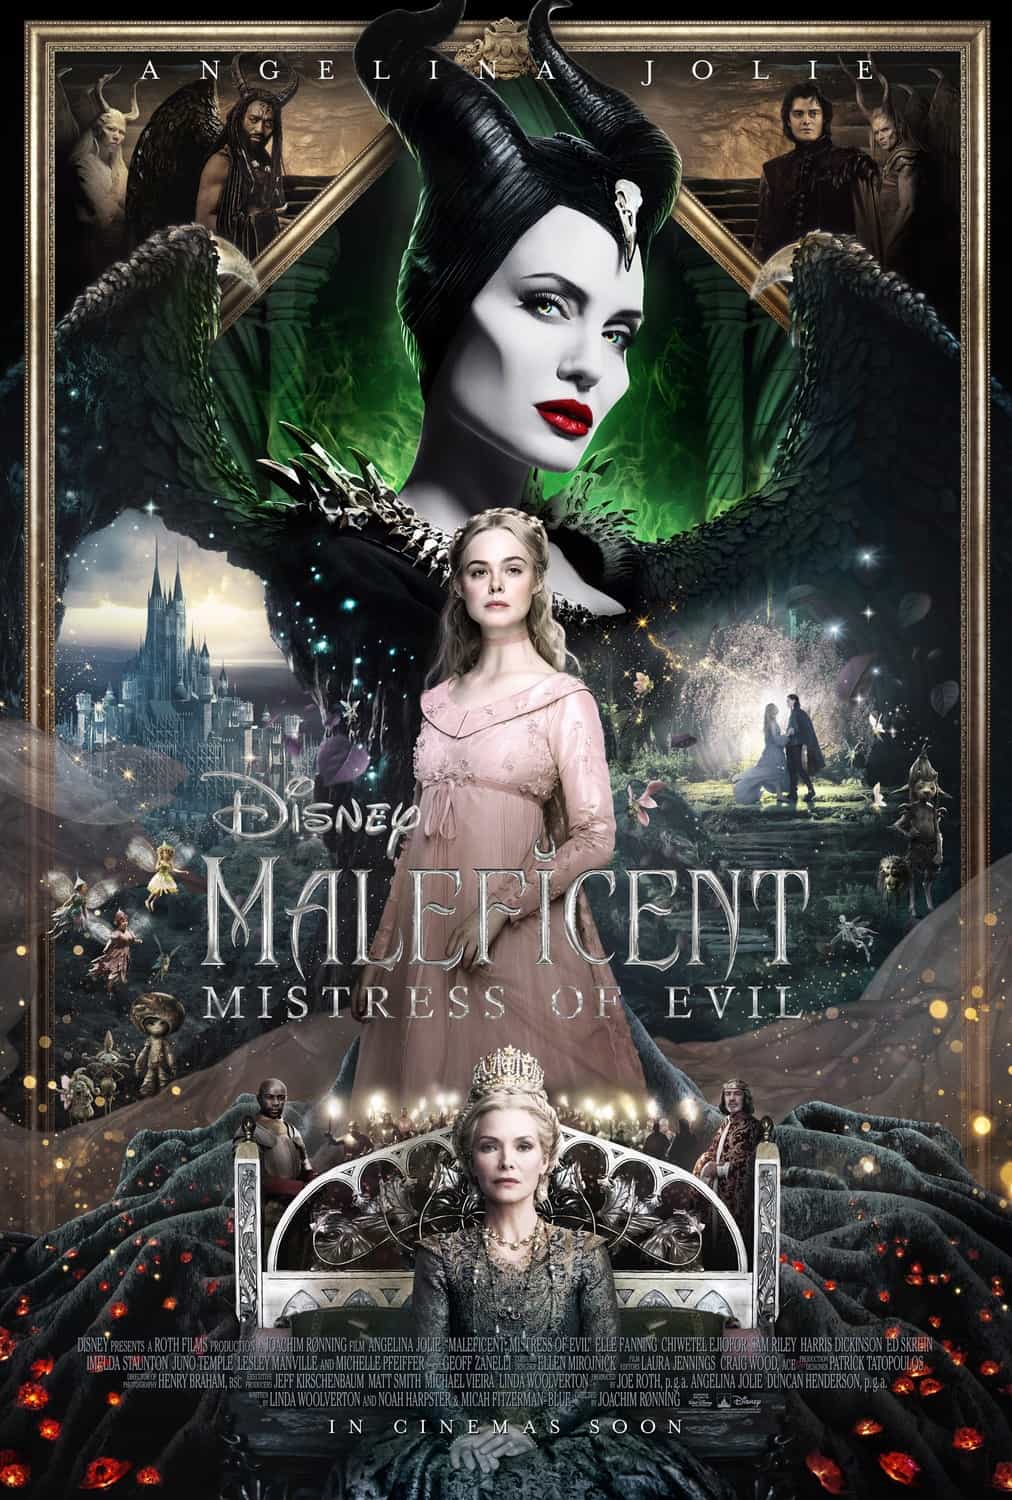 US Box Office Weekend Report 25th - 27th October 2019:  Maleficent 2 spends a second weekend at the top denying Joker a return while Countdown is the top new film at four